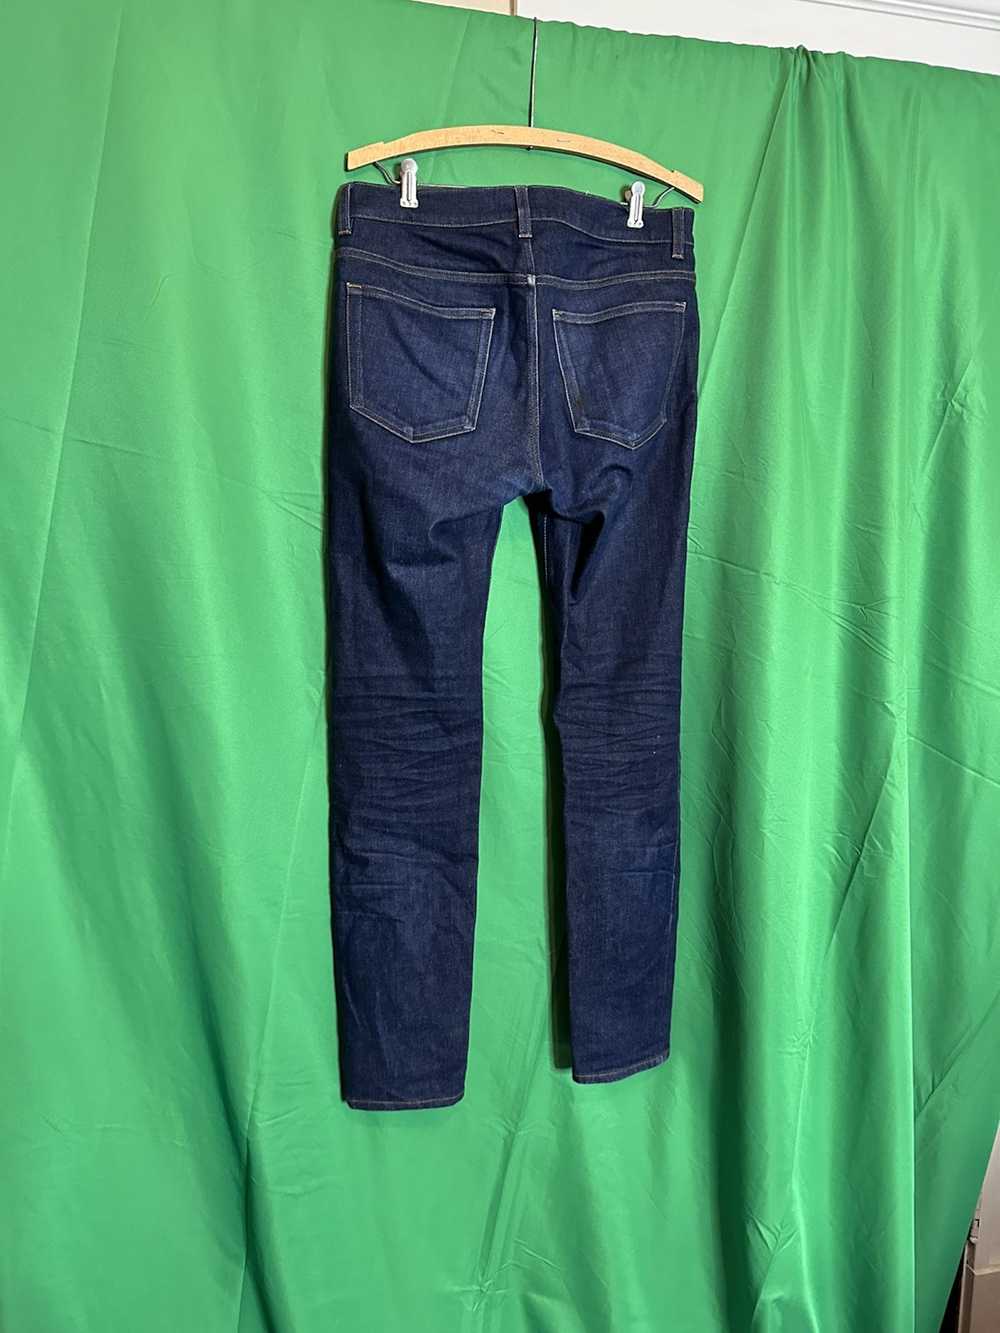 Acne Studios Ace model slim blue jeans made in It… - image 7